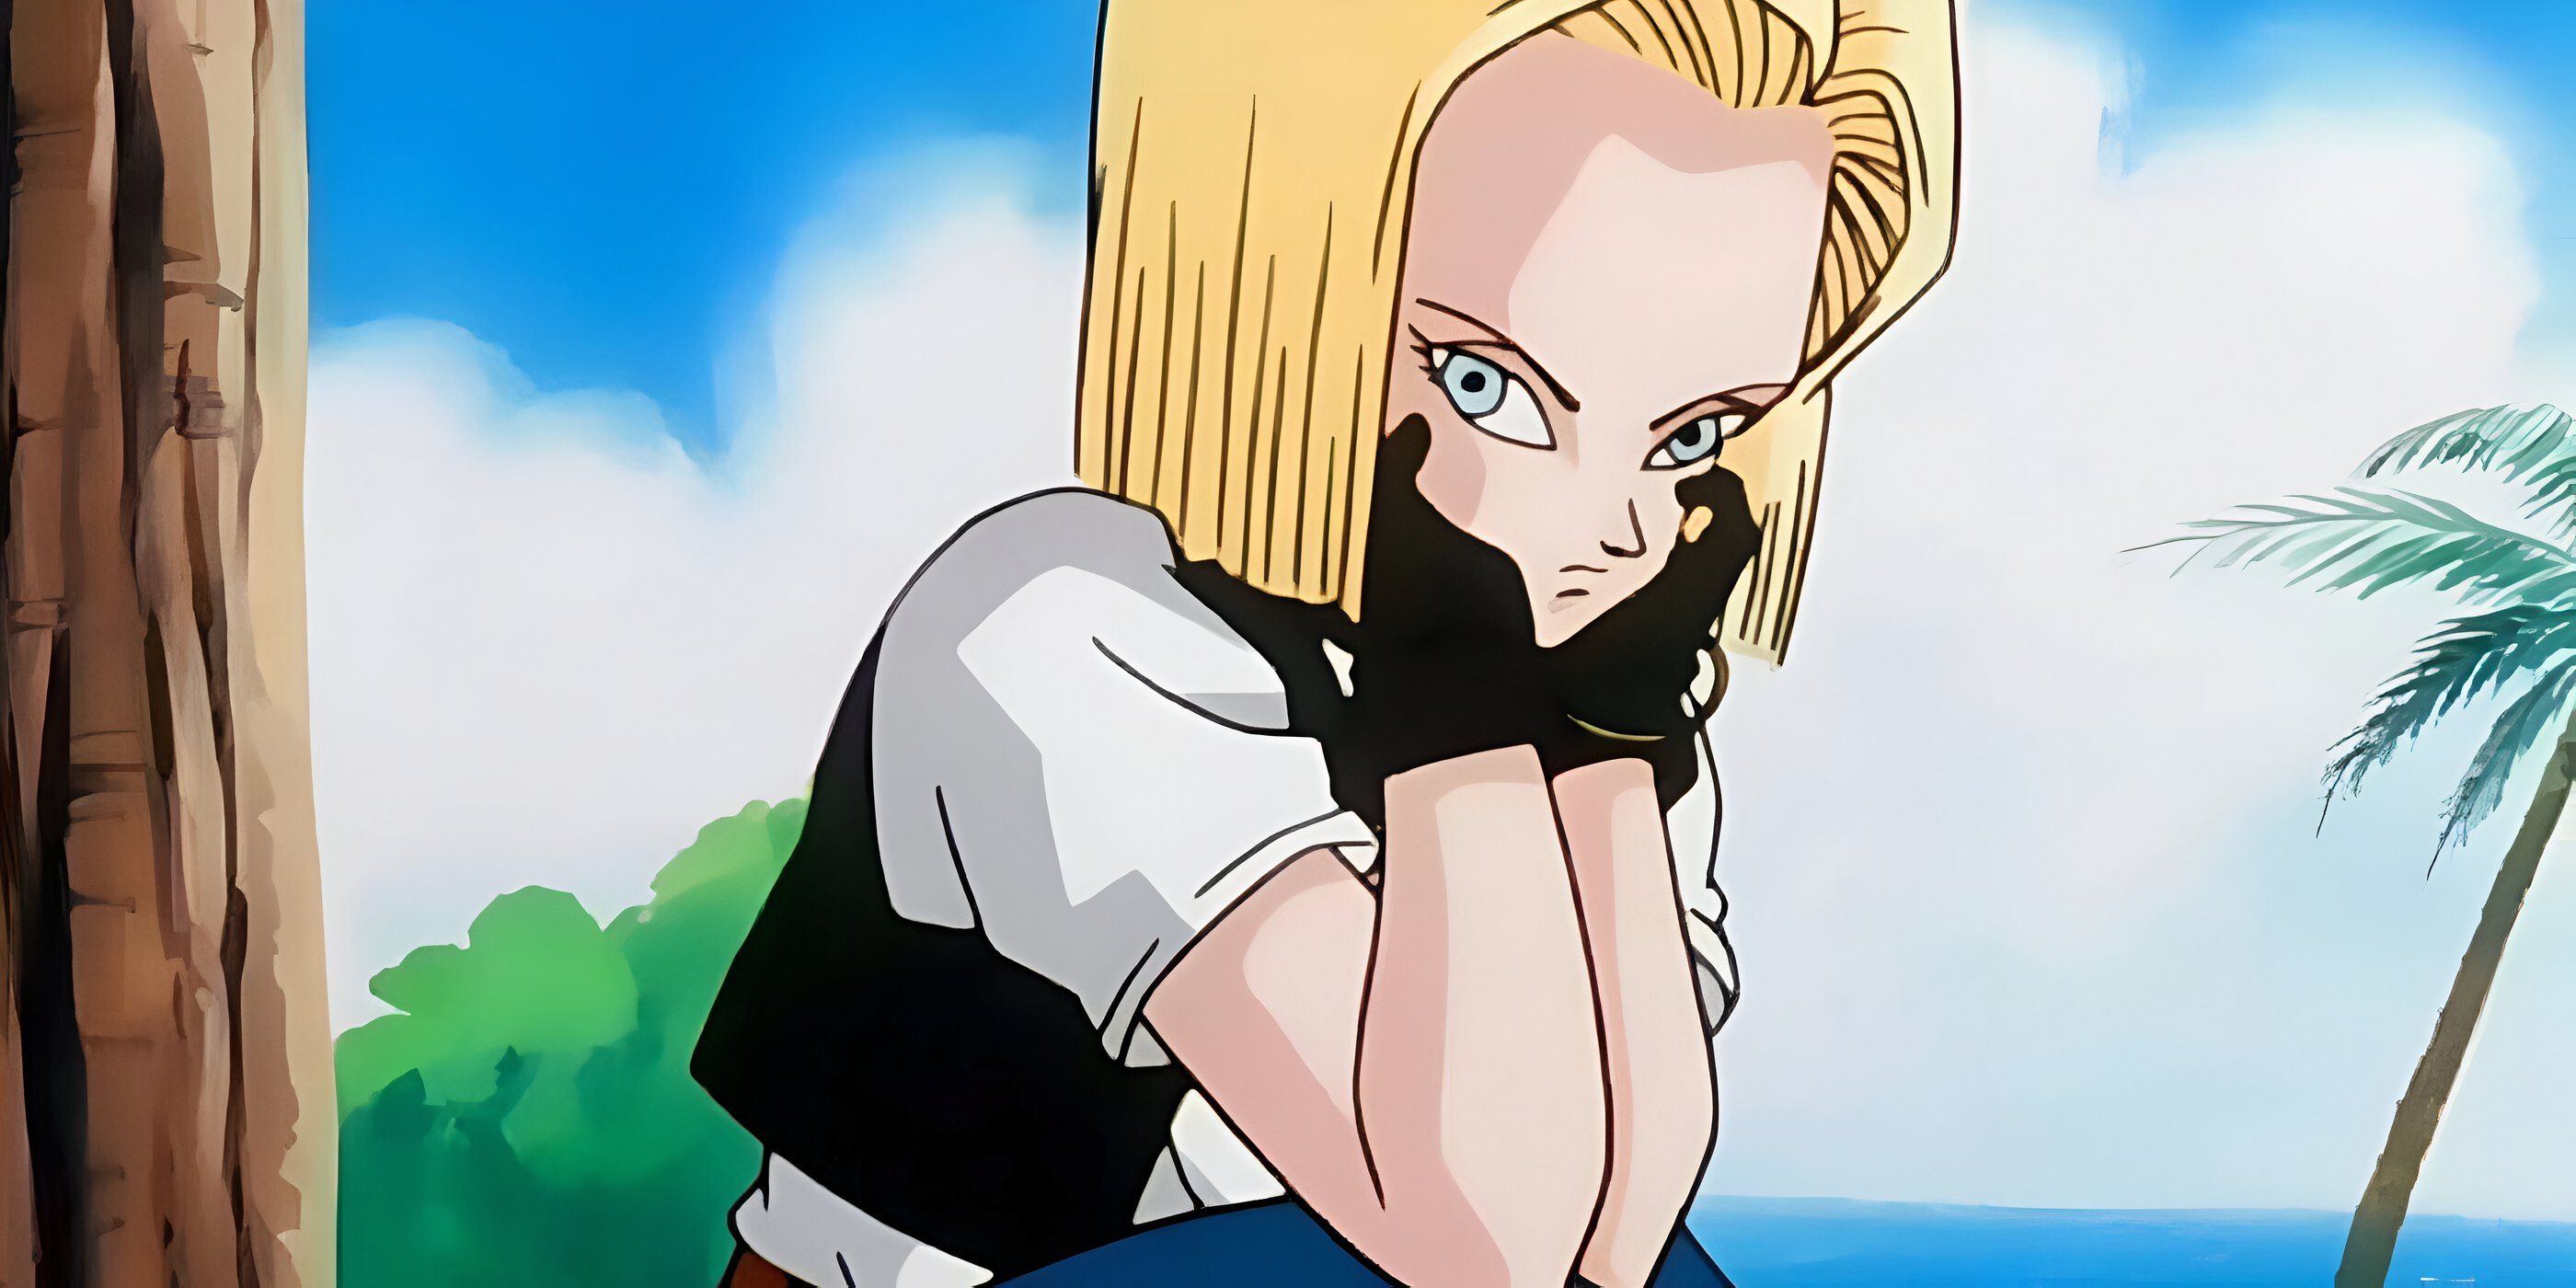 android 18 sitting with her hands holding her face dragon ball z